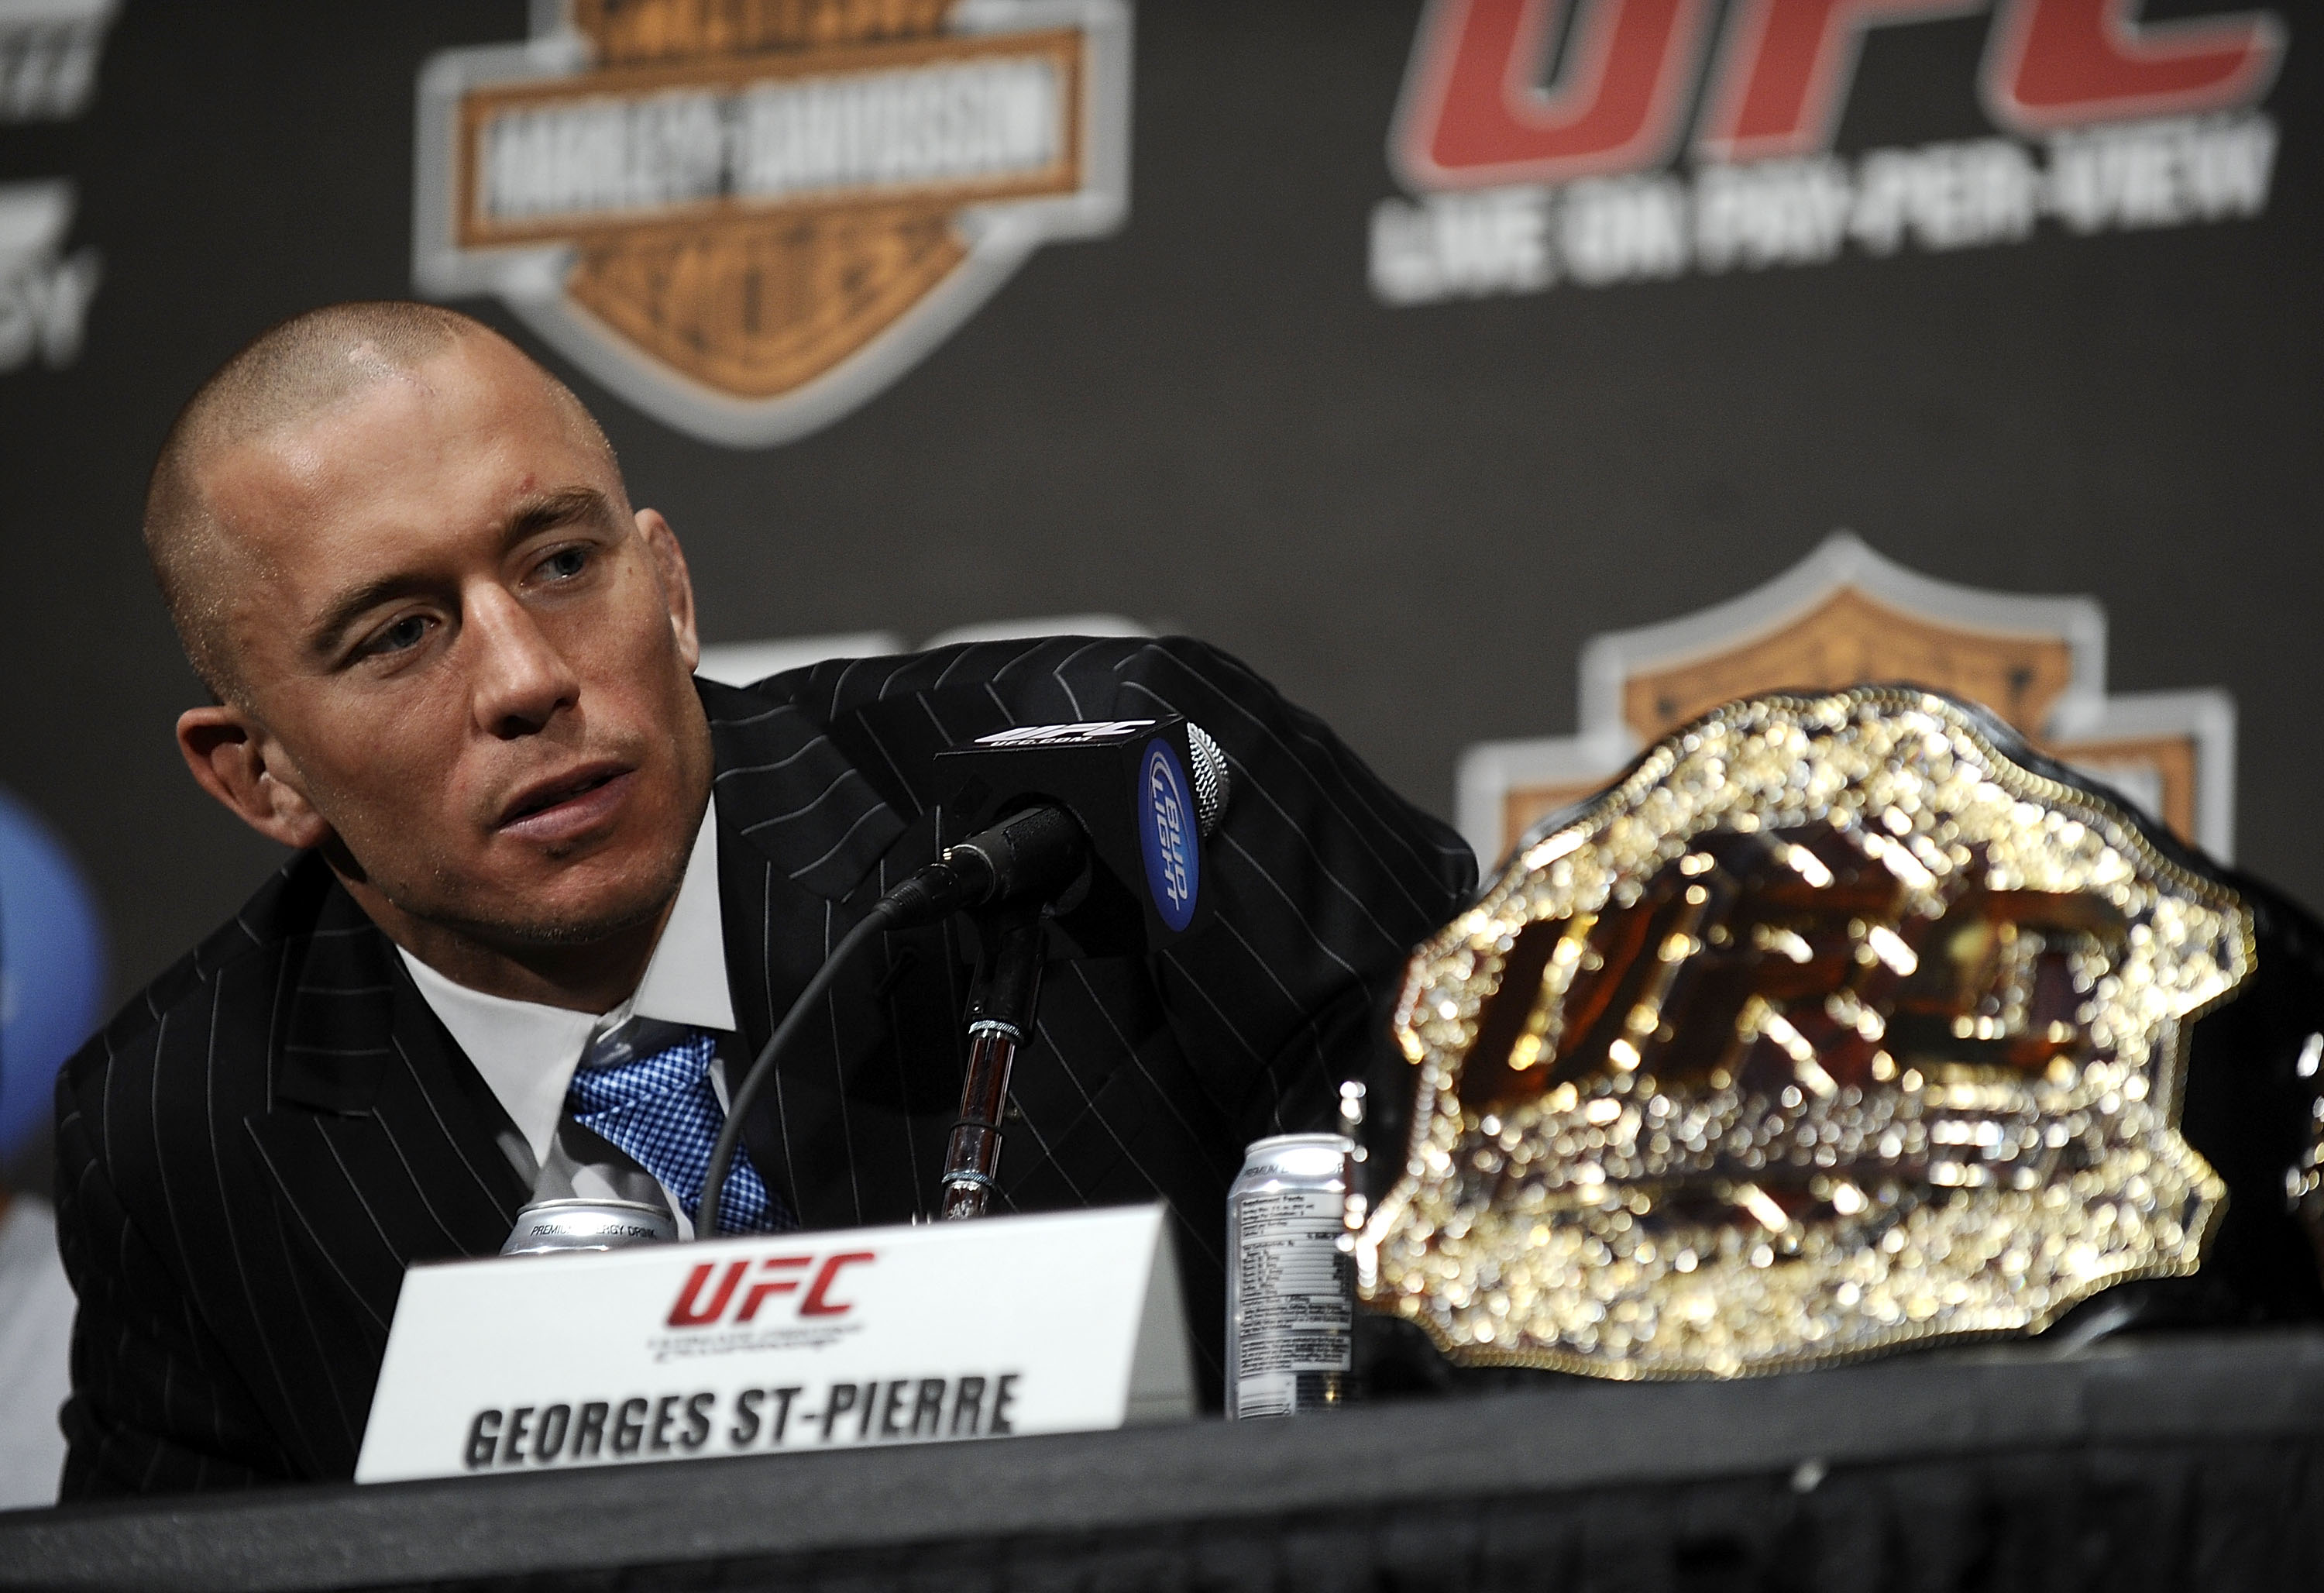 NEW YORK - MARCH 24:  Georges St-Pierre of Montreal, Quebec, Canada speaks at a press conference for UFC 111 at Radio City Music Hall on March 24, 2010 in New York City.  St-Pierre will face Dan Hardy of Nottingham UK in the Welterweight title bout.  (Pho